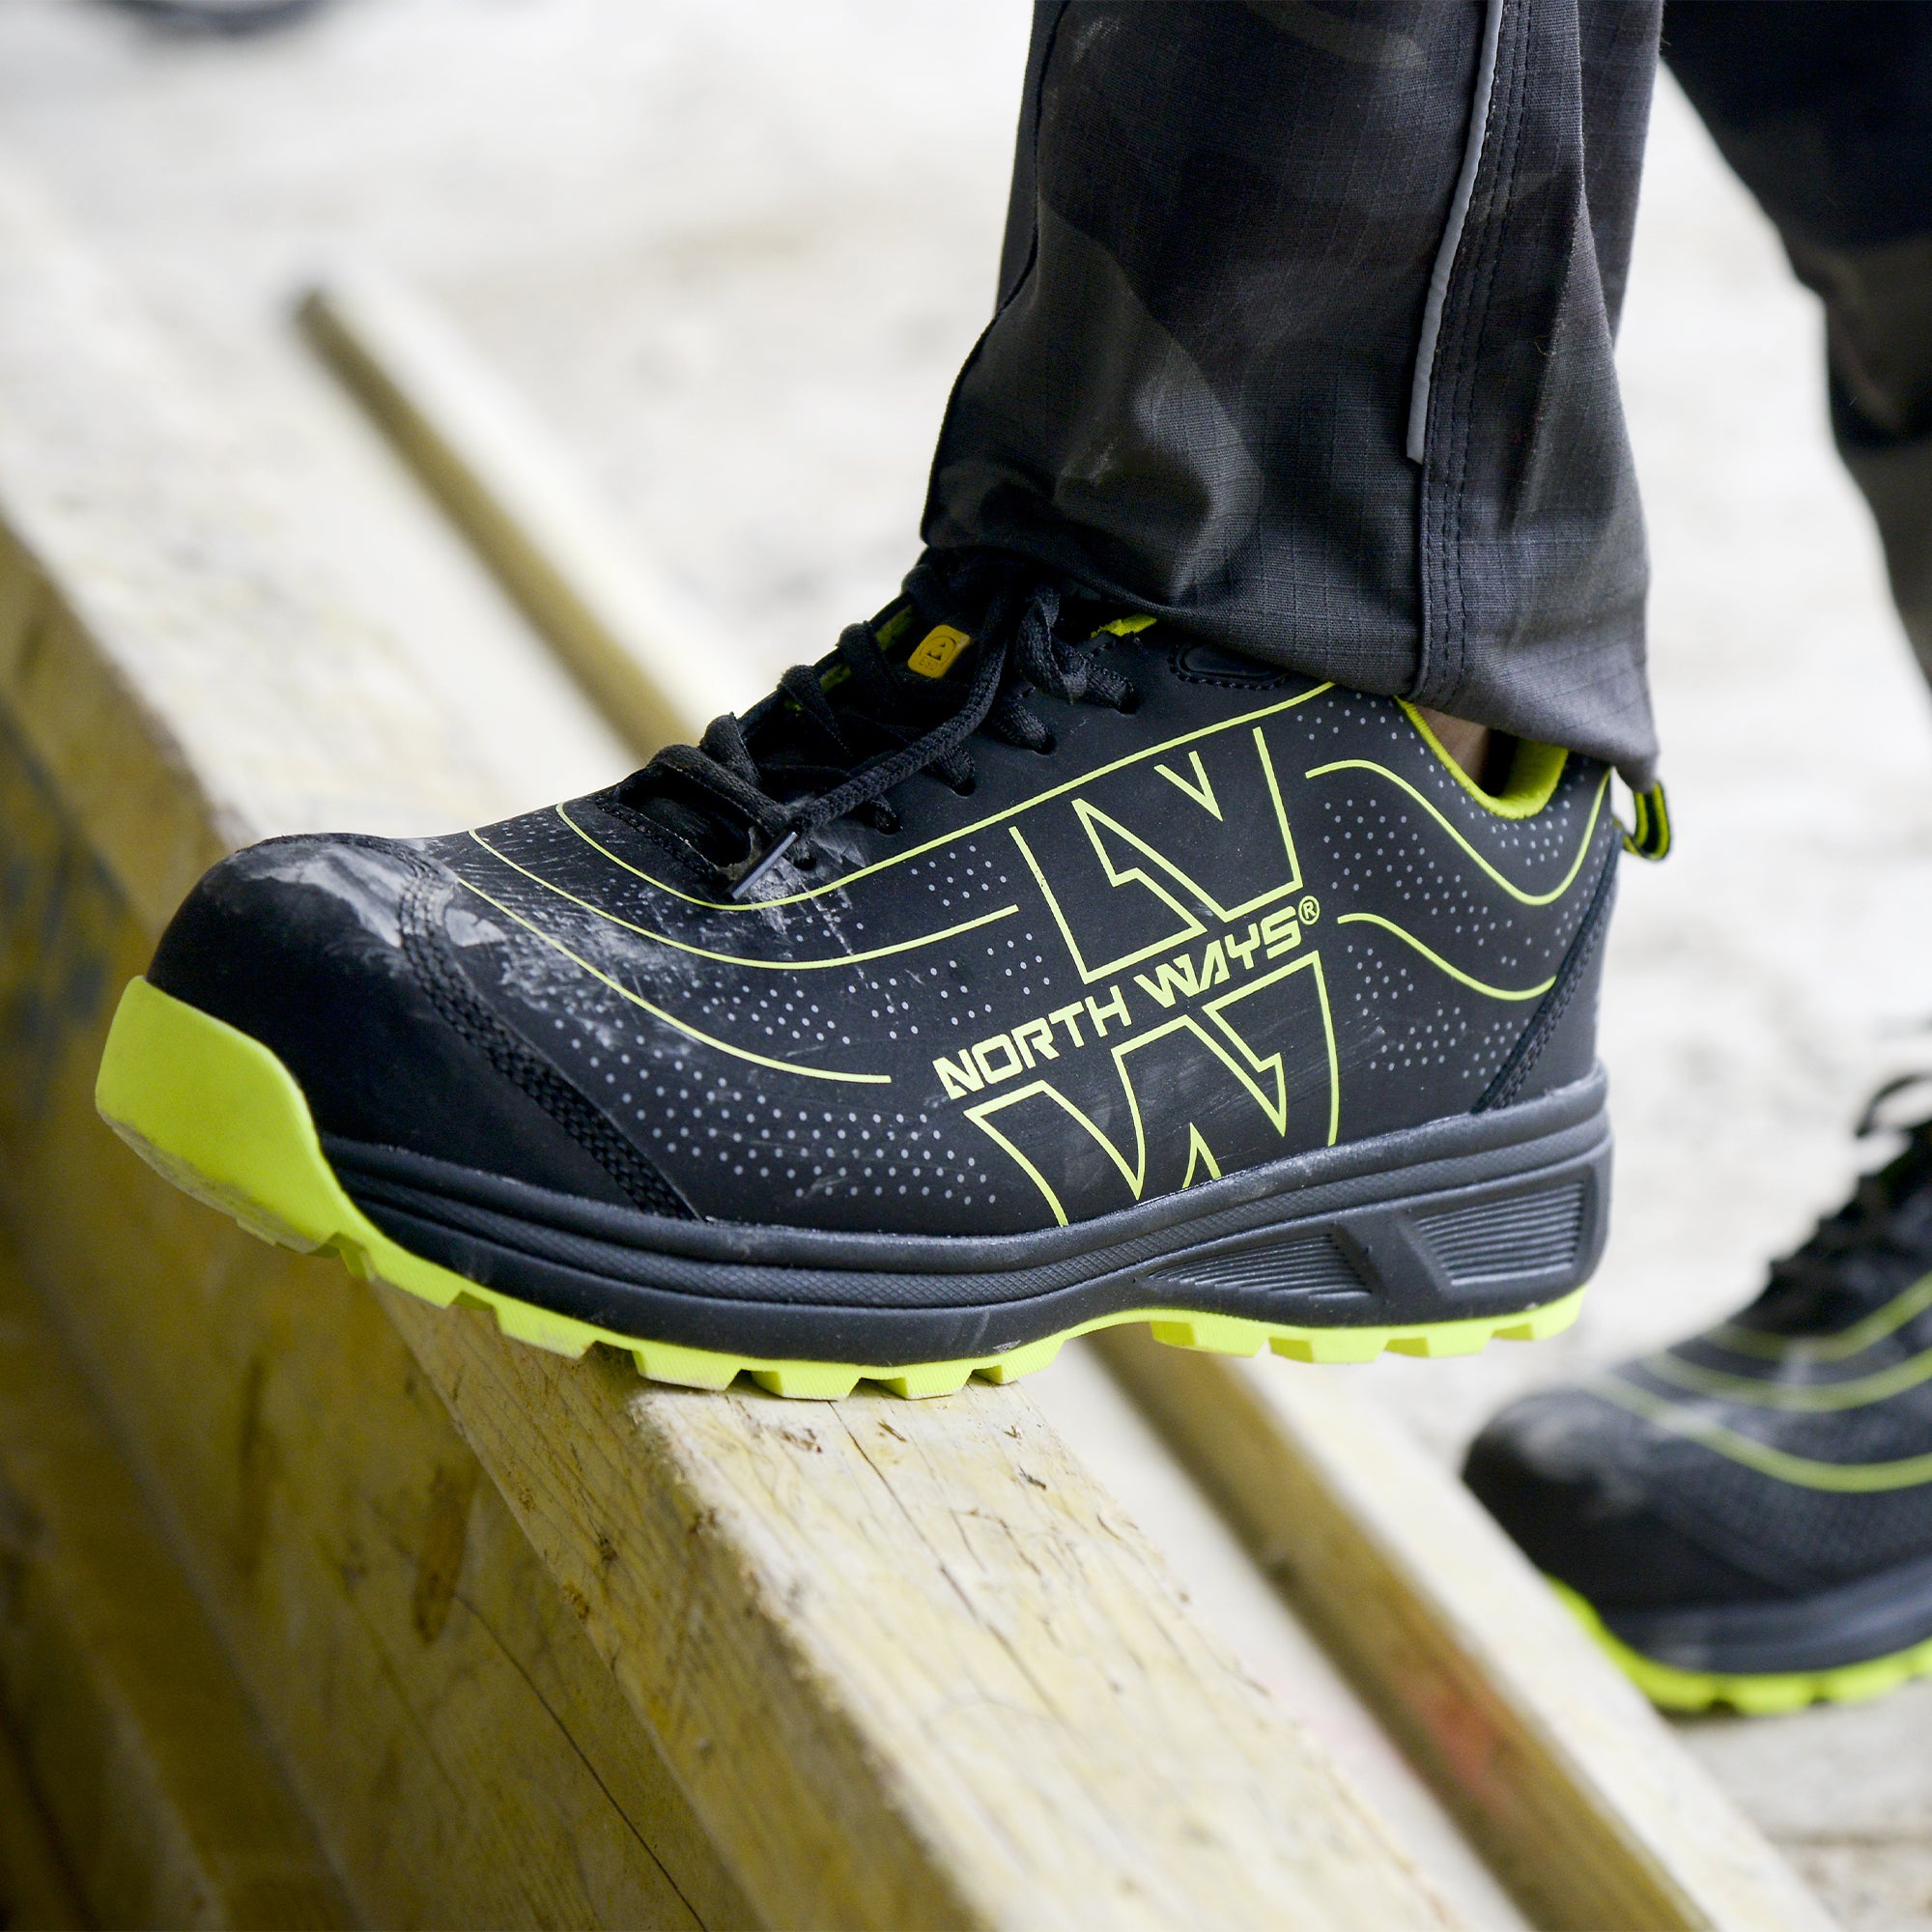 SPILL - LOW SAFETY SHOES - 7045 | Black / Fluorescent yellow